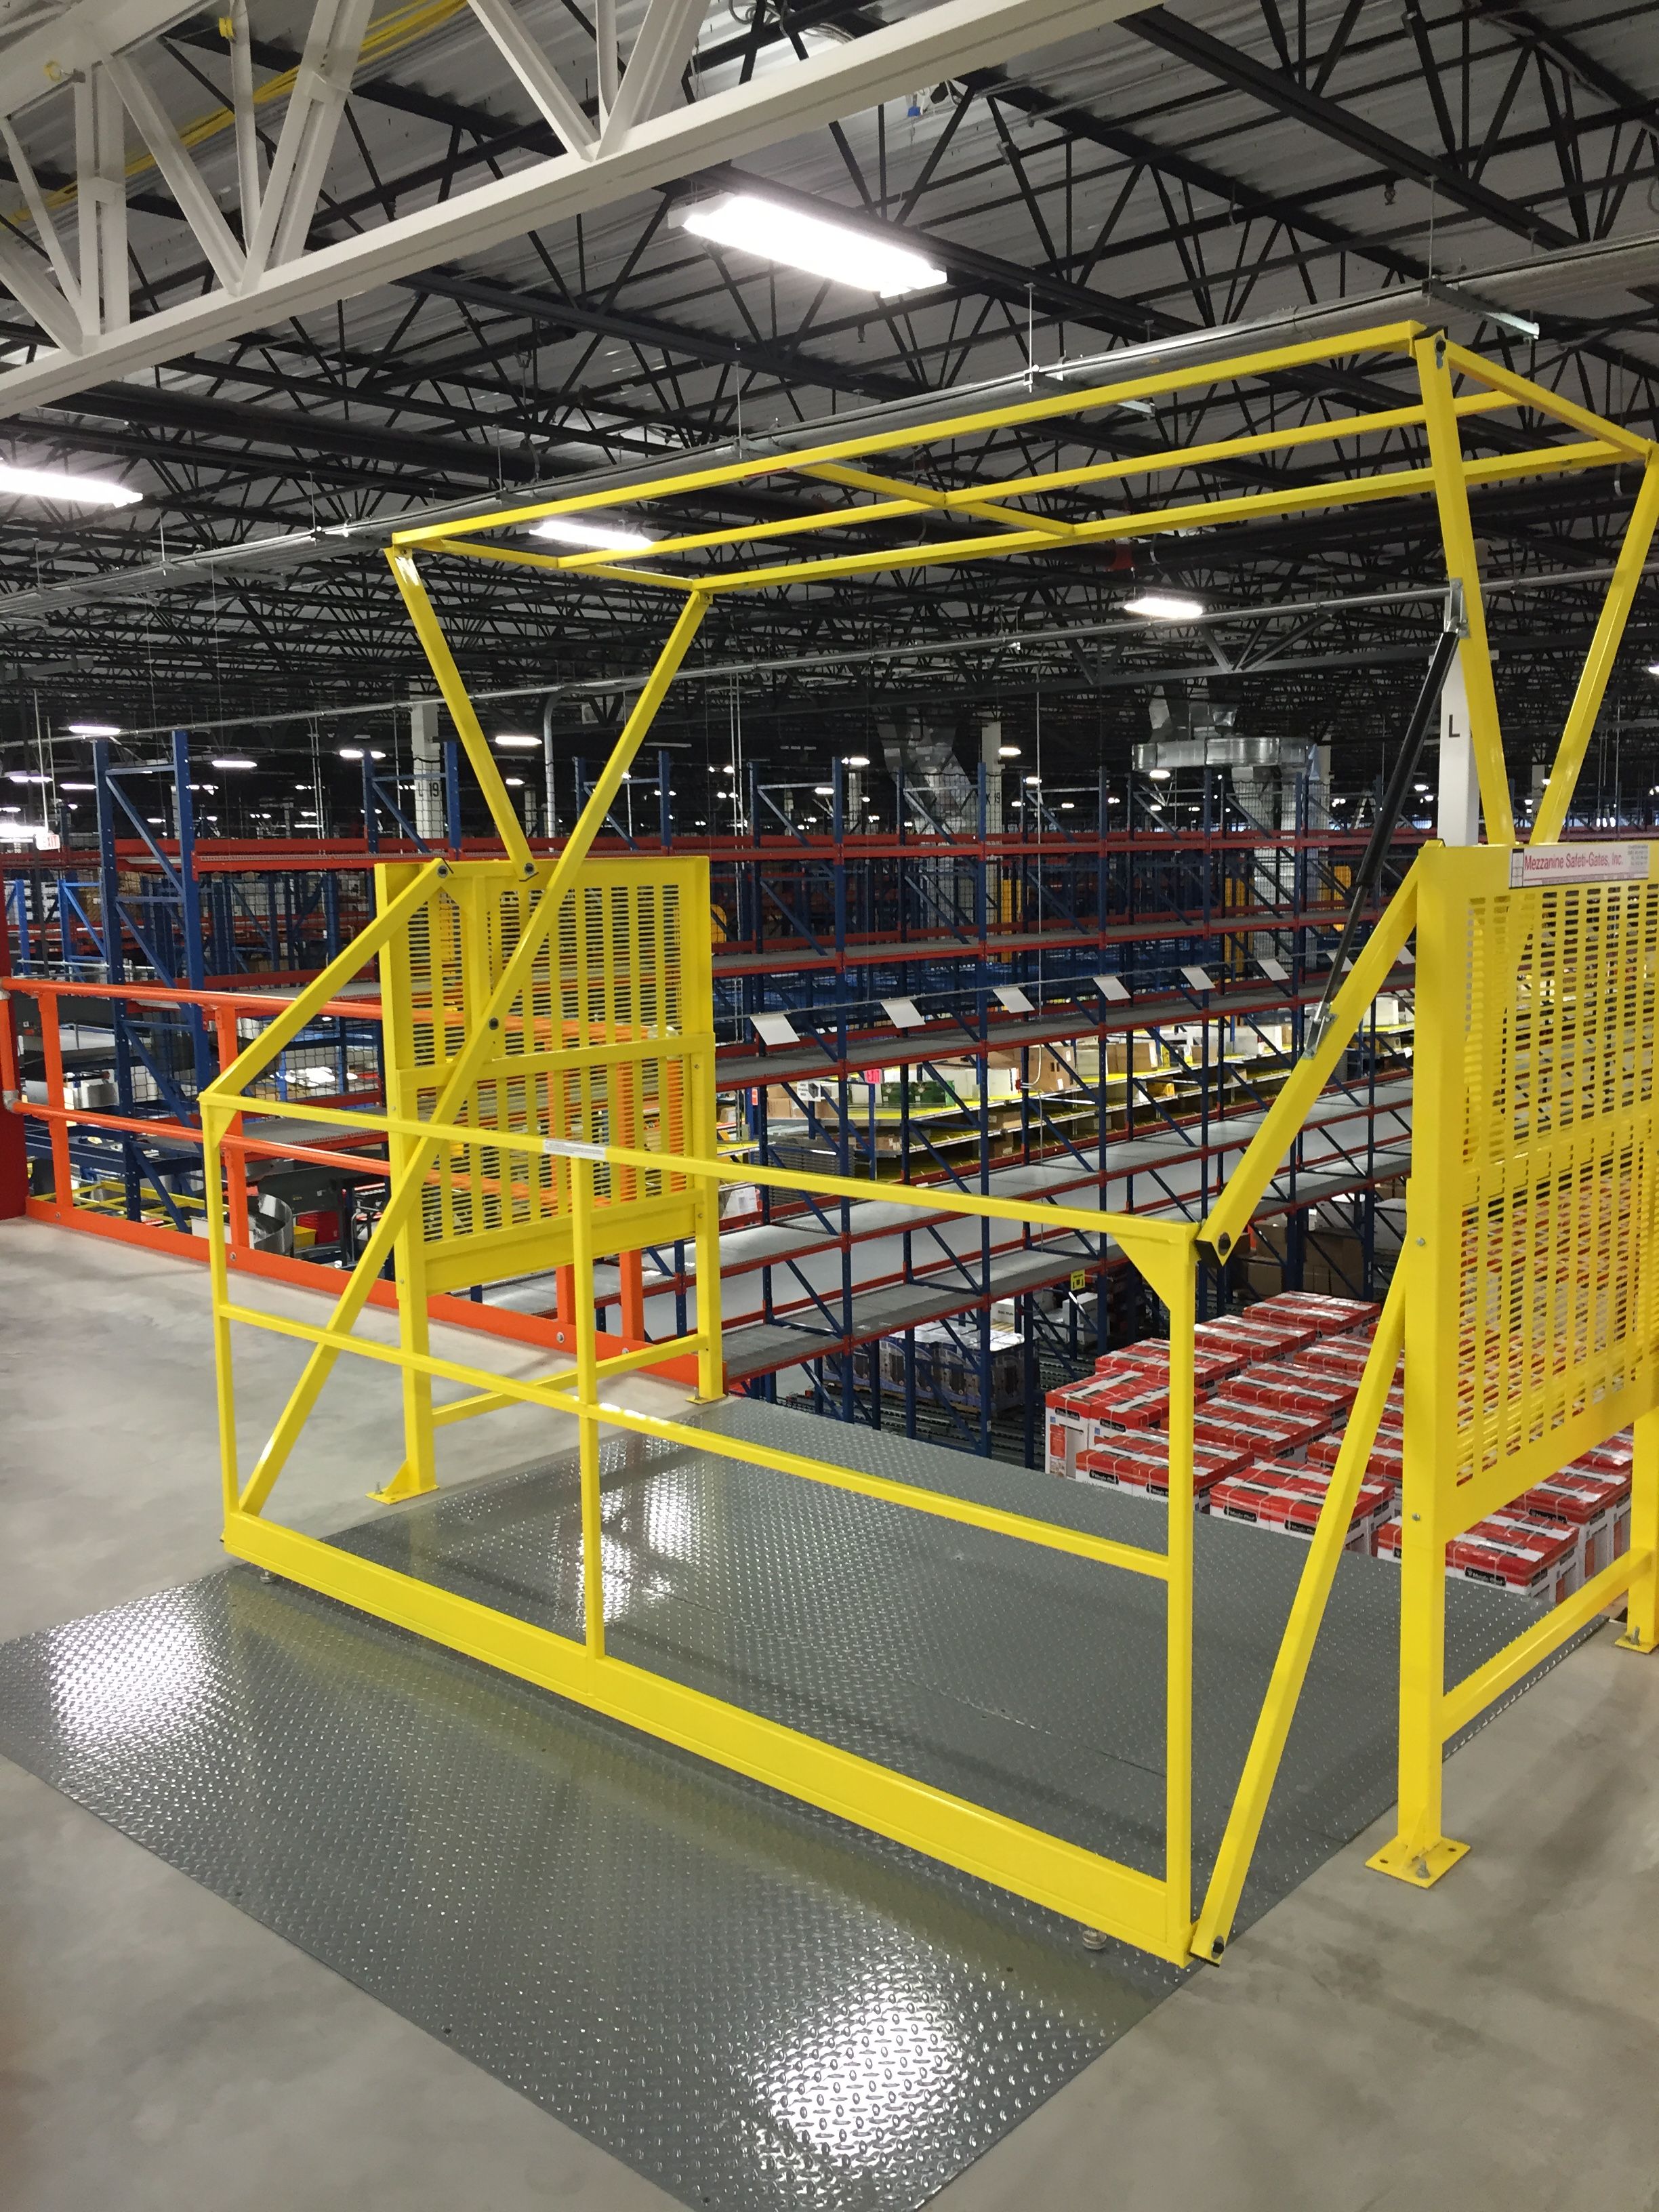 pallet drop safety gate in High Pallet Pivot design with custom mesh panels